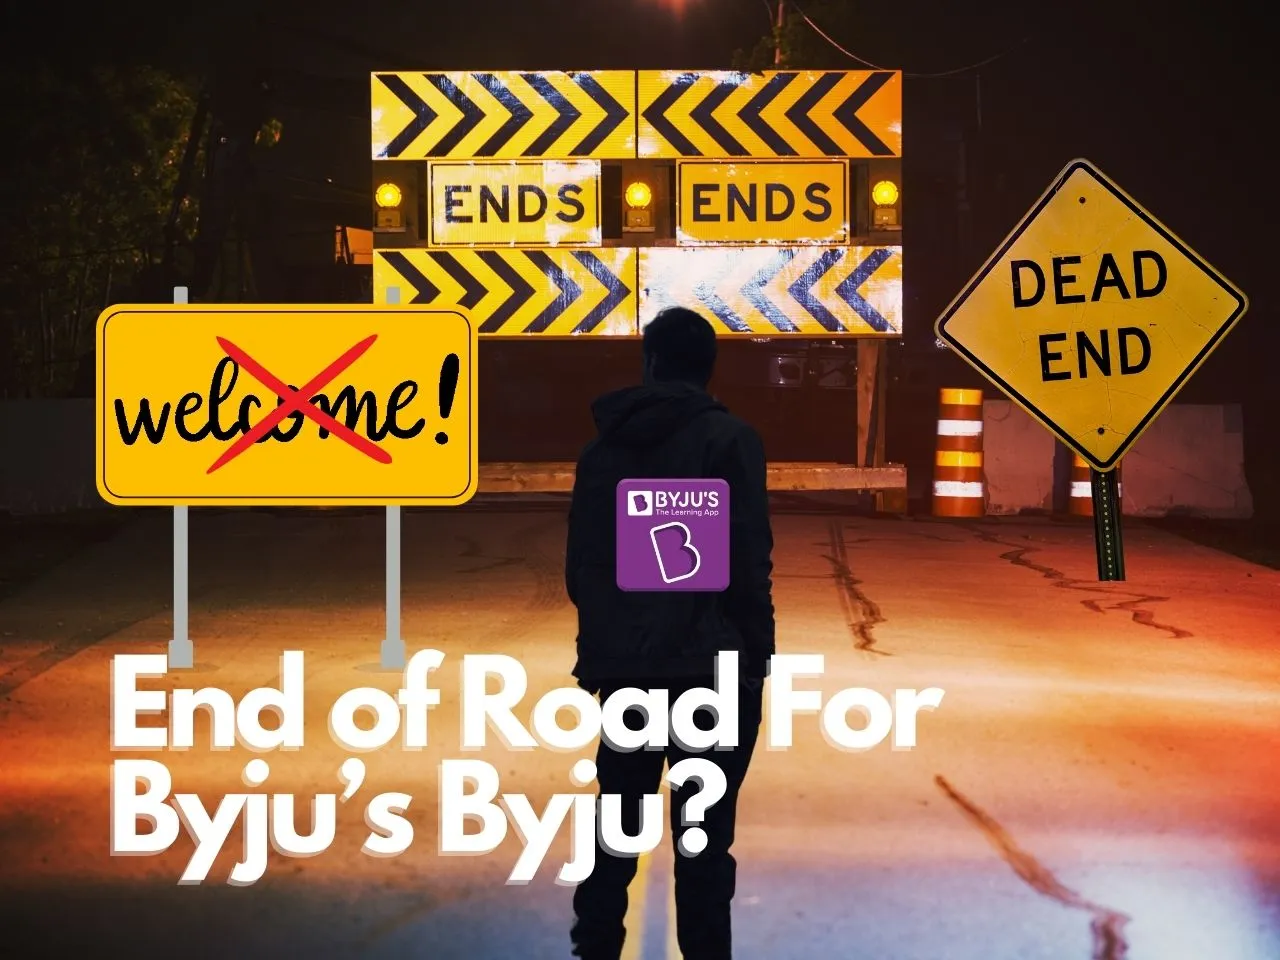 Byju's Has A New Board Now: Is It End of the Road for Raveendran?